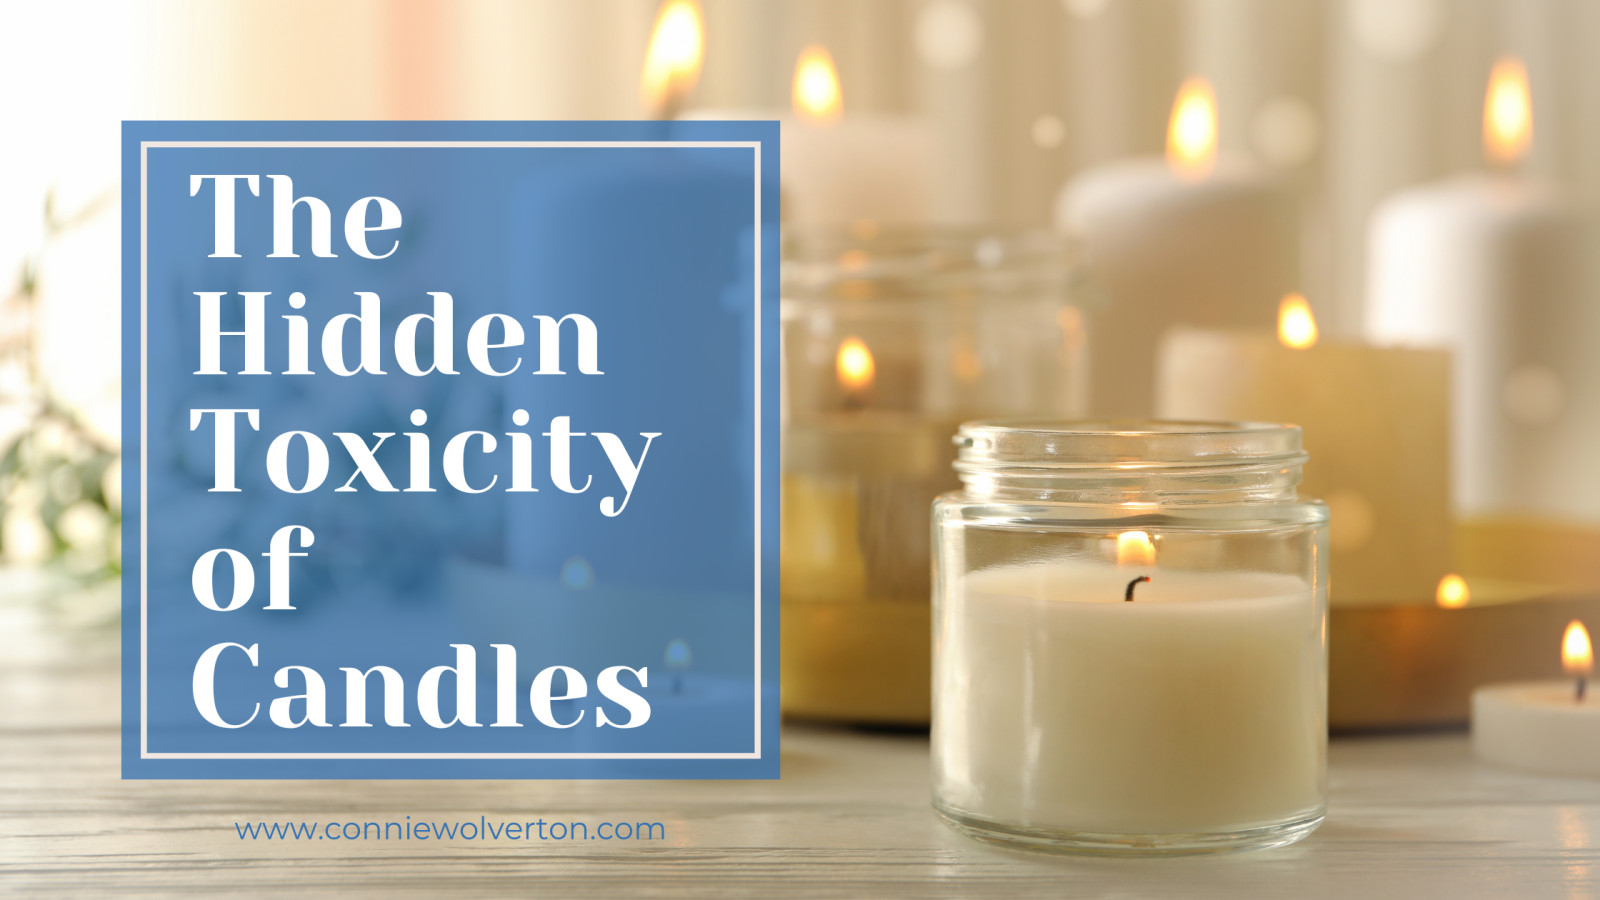 The Hidden Toxicity of Candles